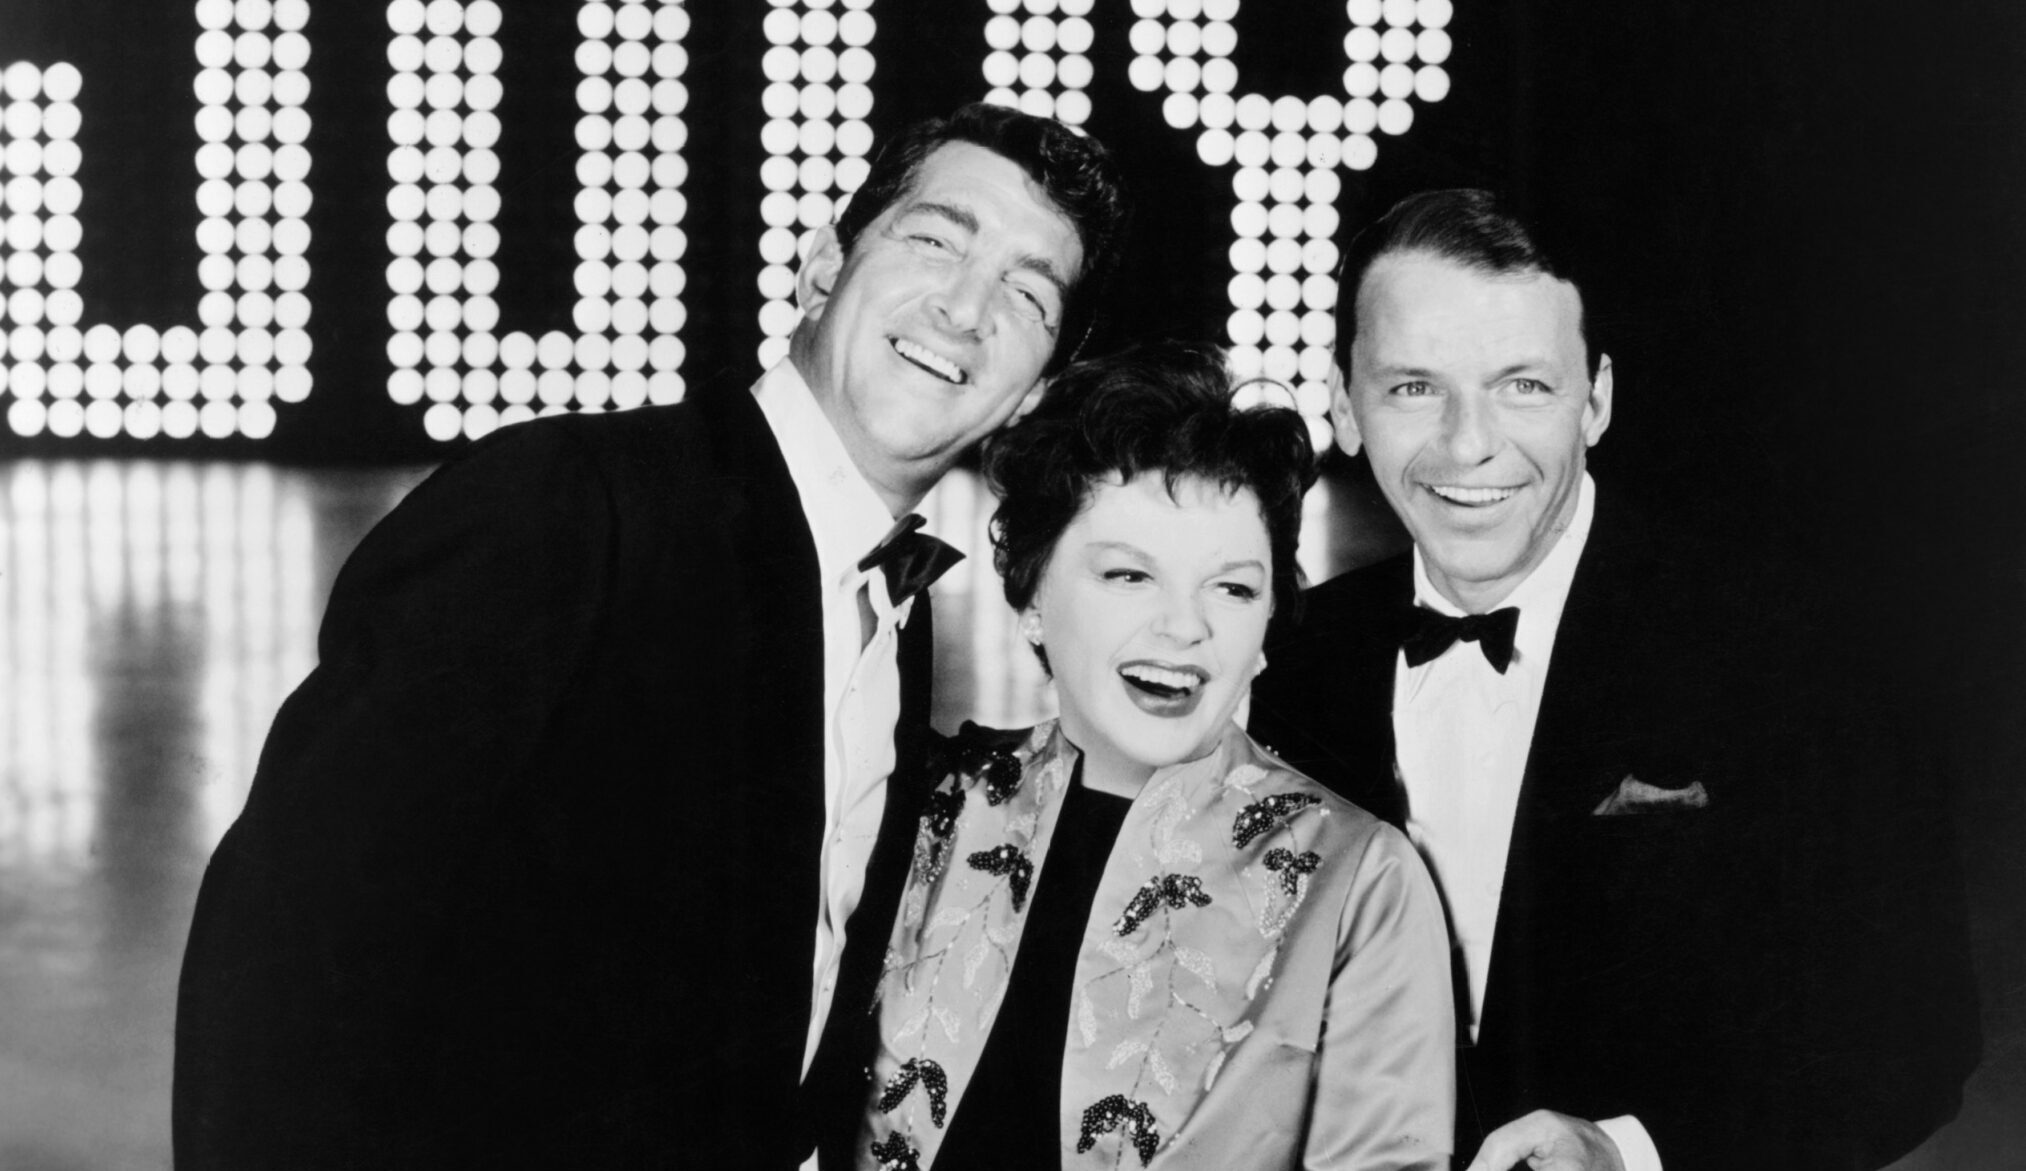 THE JUDY GARLAND SHOW, from left, Dean Martin, Judy Garland, Frank Sinatra, aired February 25, 1962